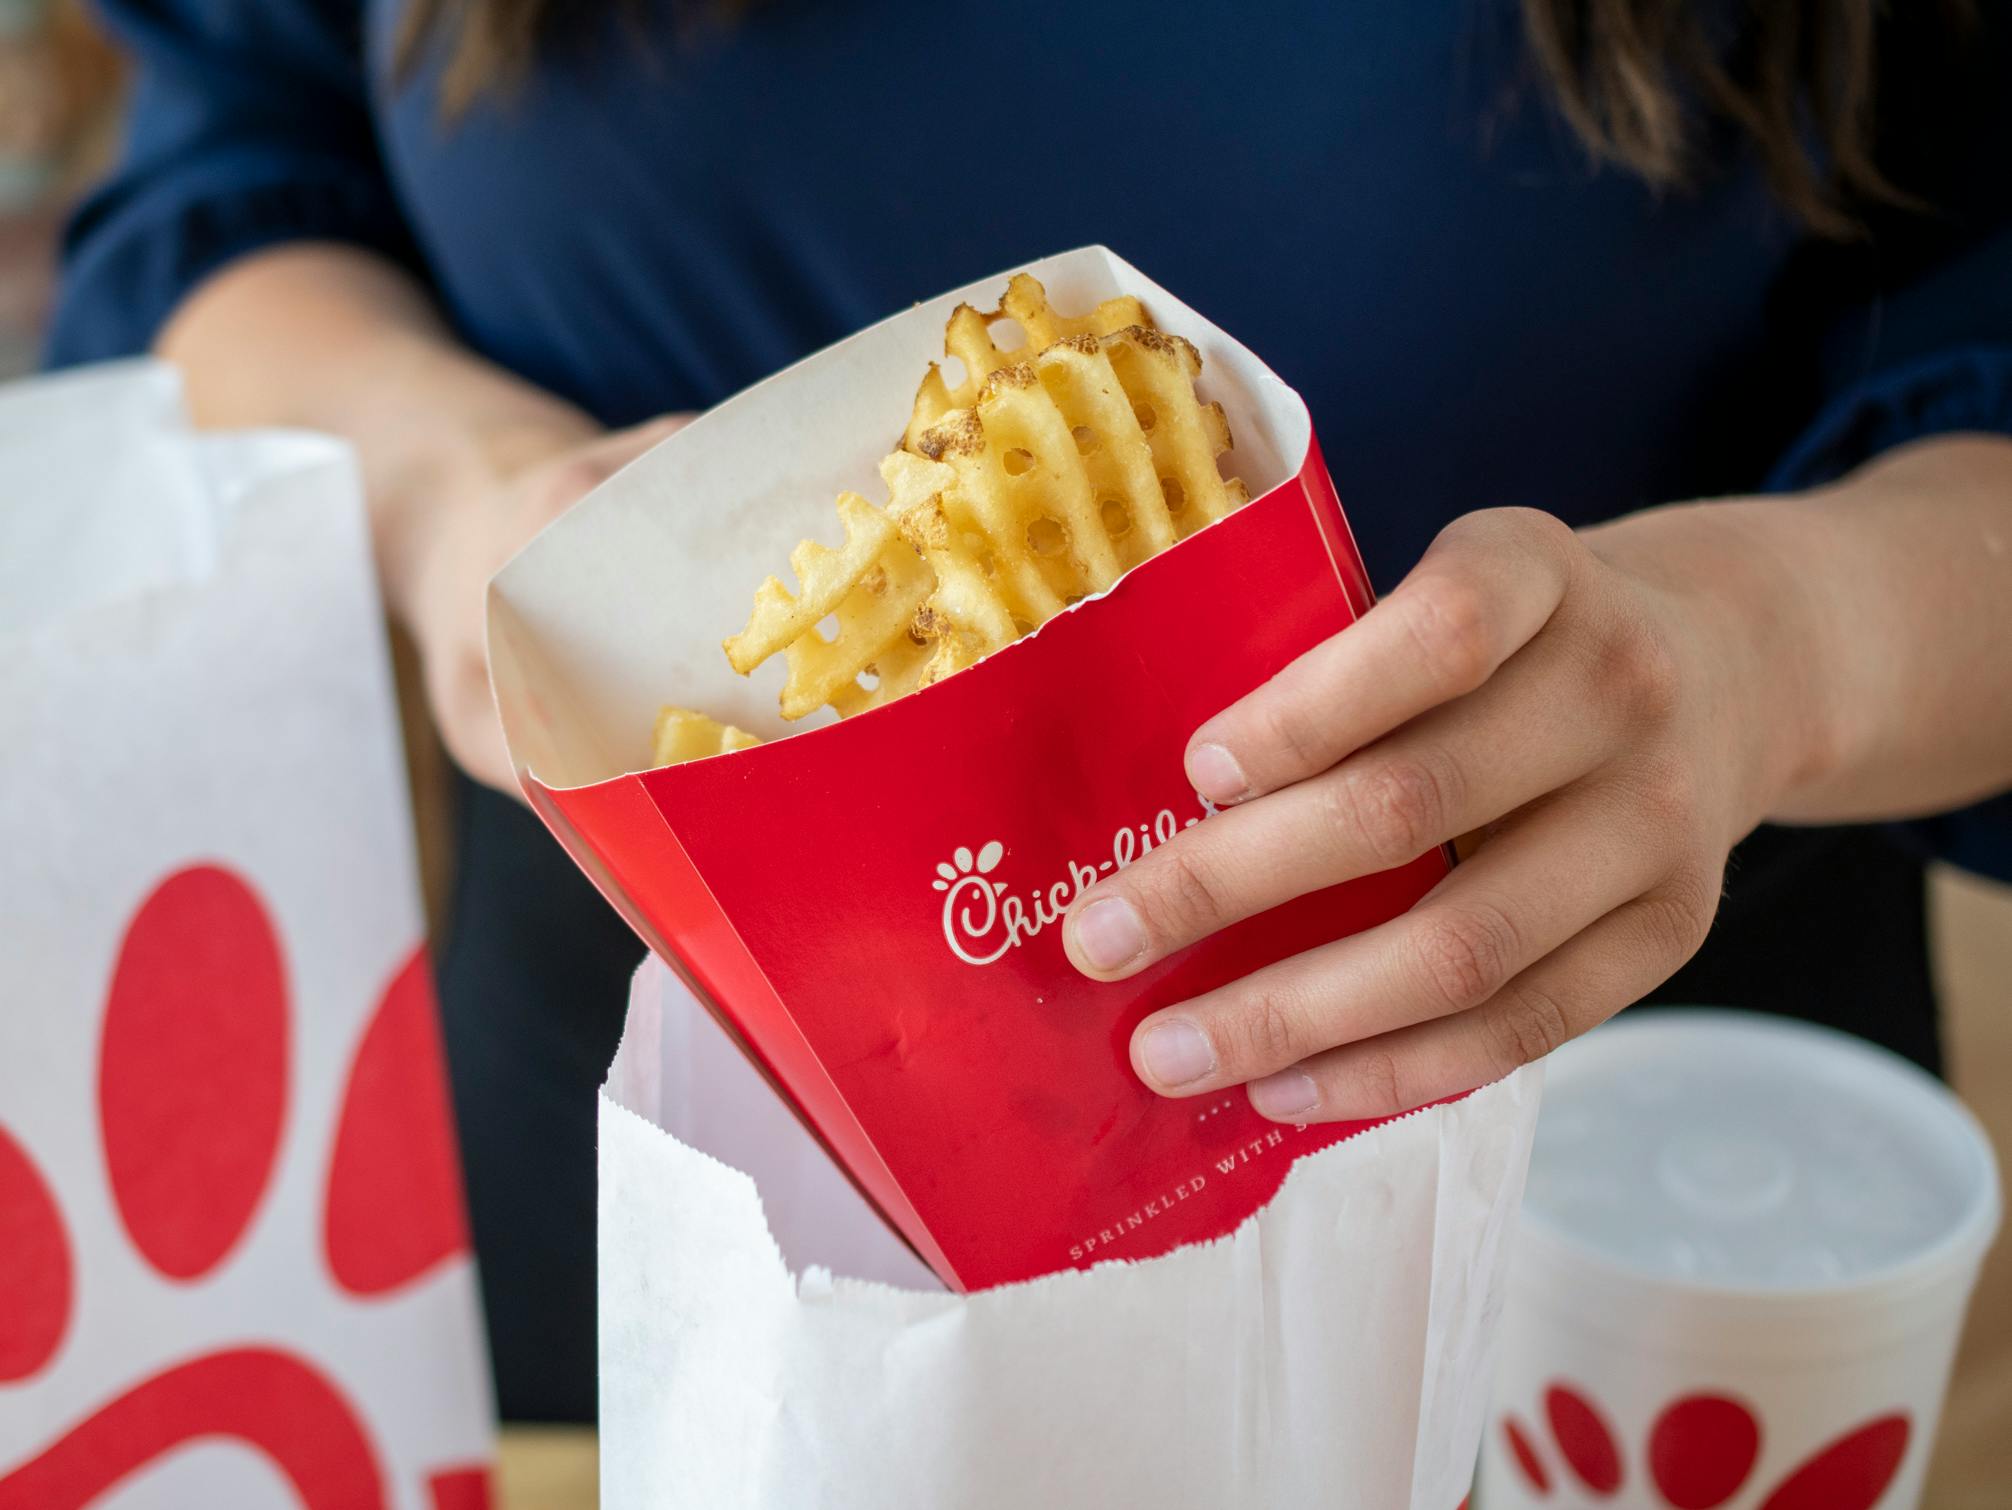 A container of Chick-fil-a waffle fries being pulled from a Chick-fil-A meal bag.